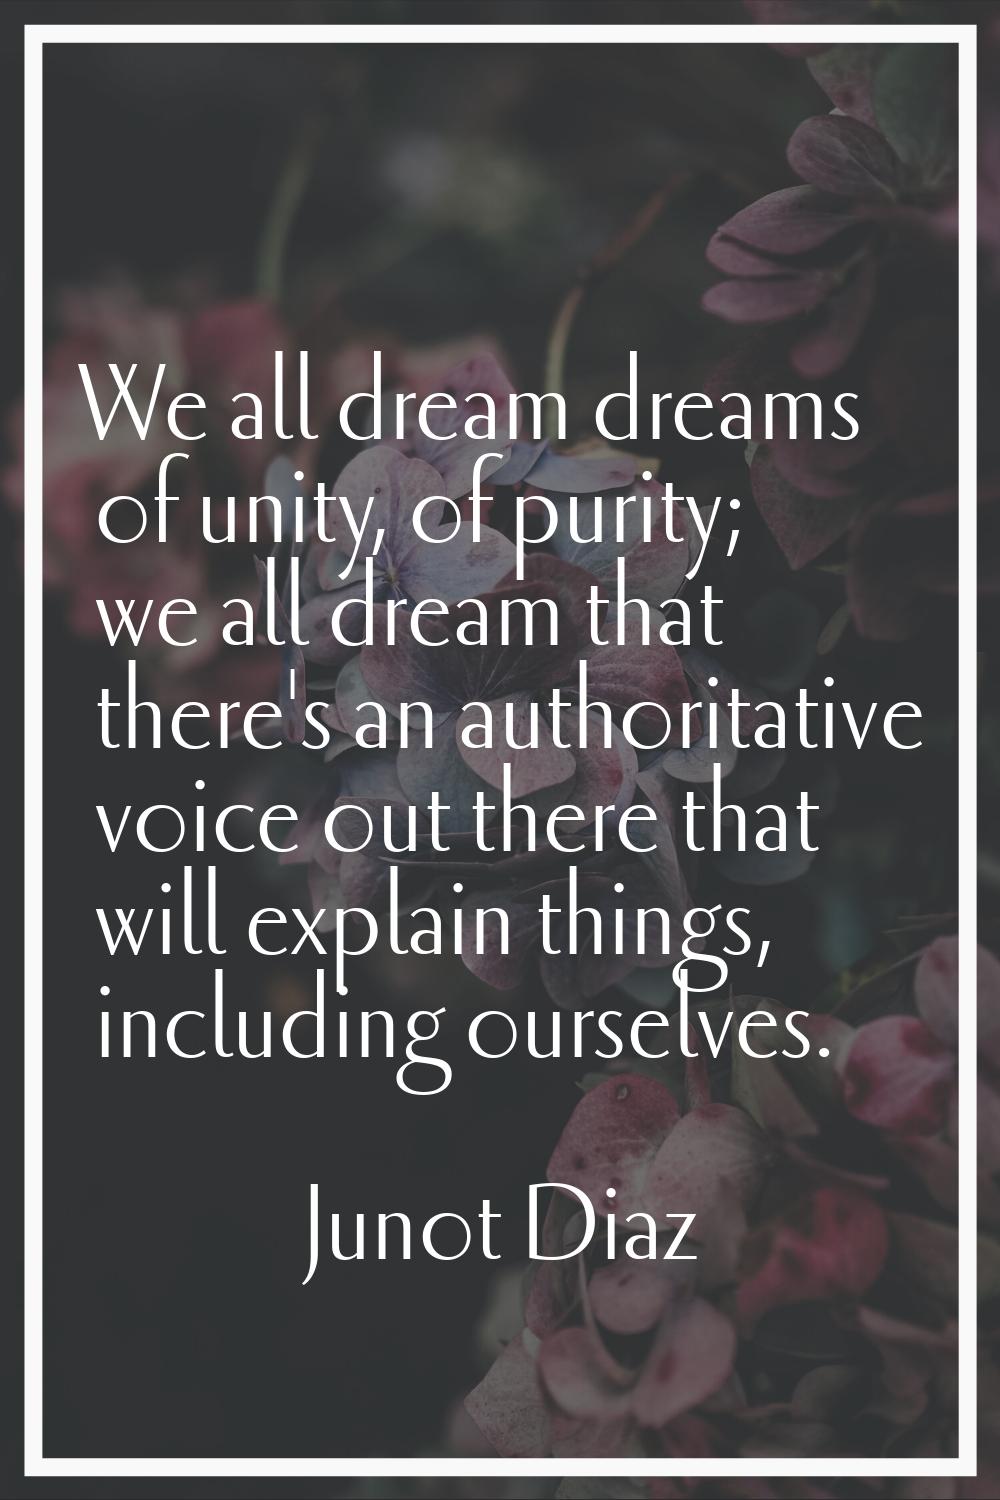 We all dream dreams of unity, of purity; we all dream that there's an authoritative voice out there